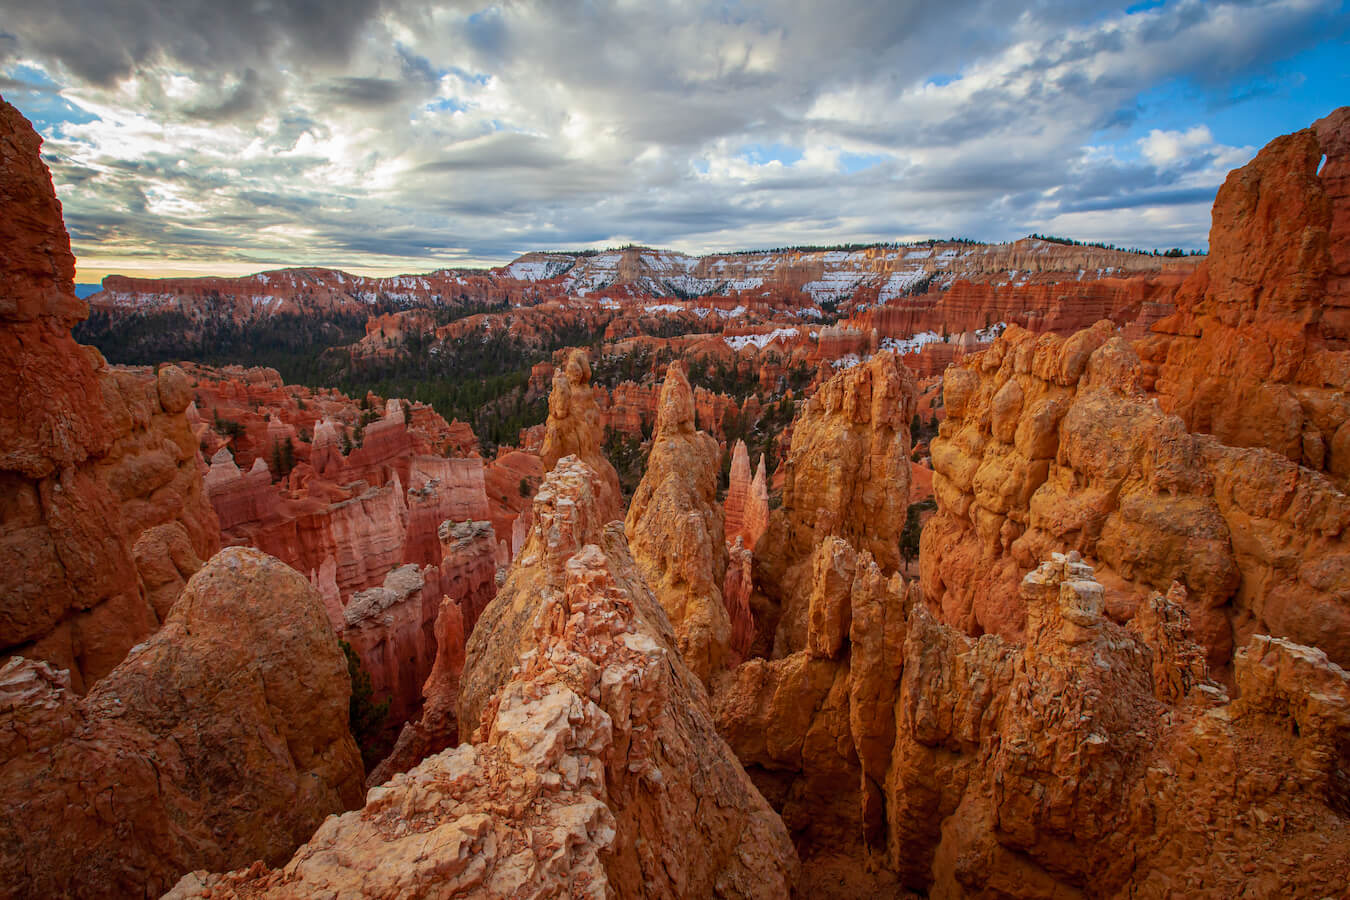 Queen's Garden Trail, Bryce Canyon National Park, Utah | Photo Credit: Vezzani Photography